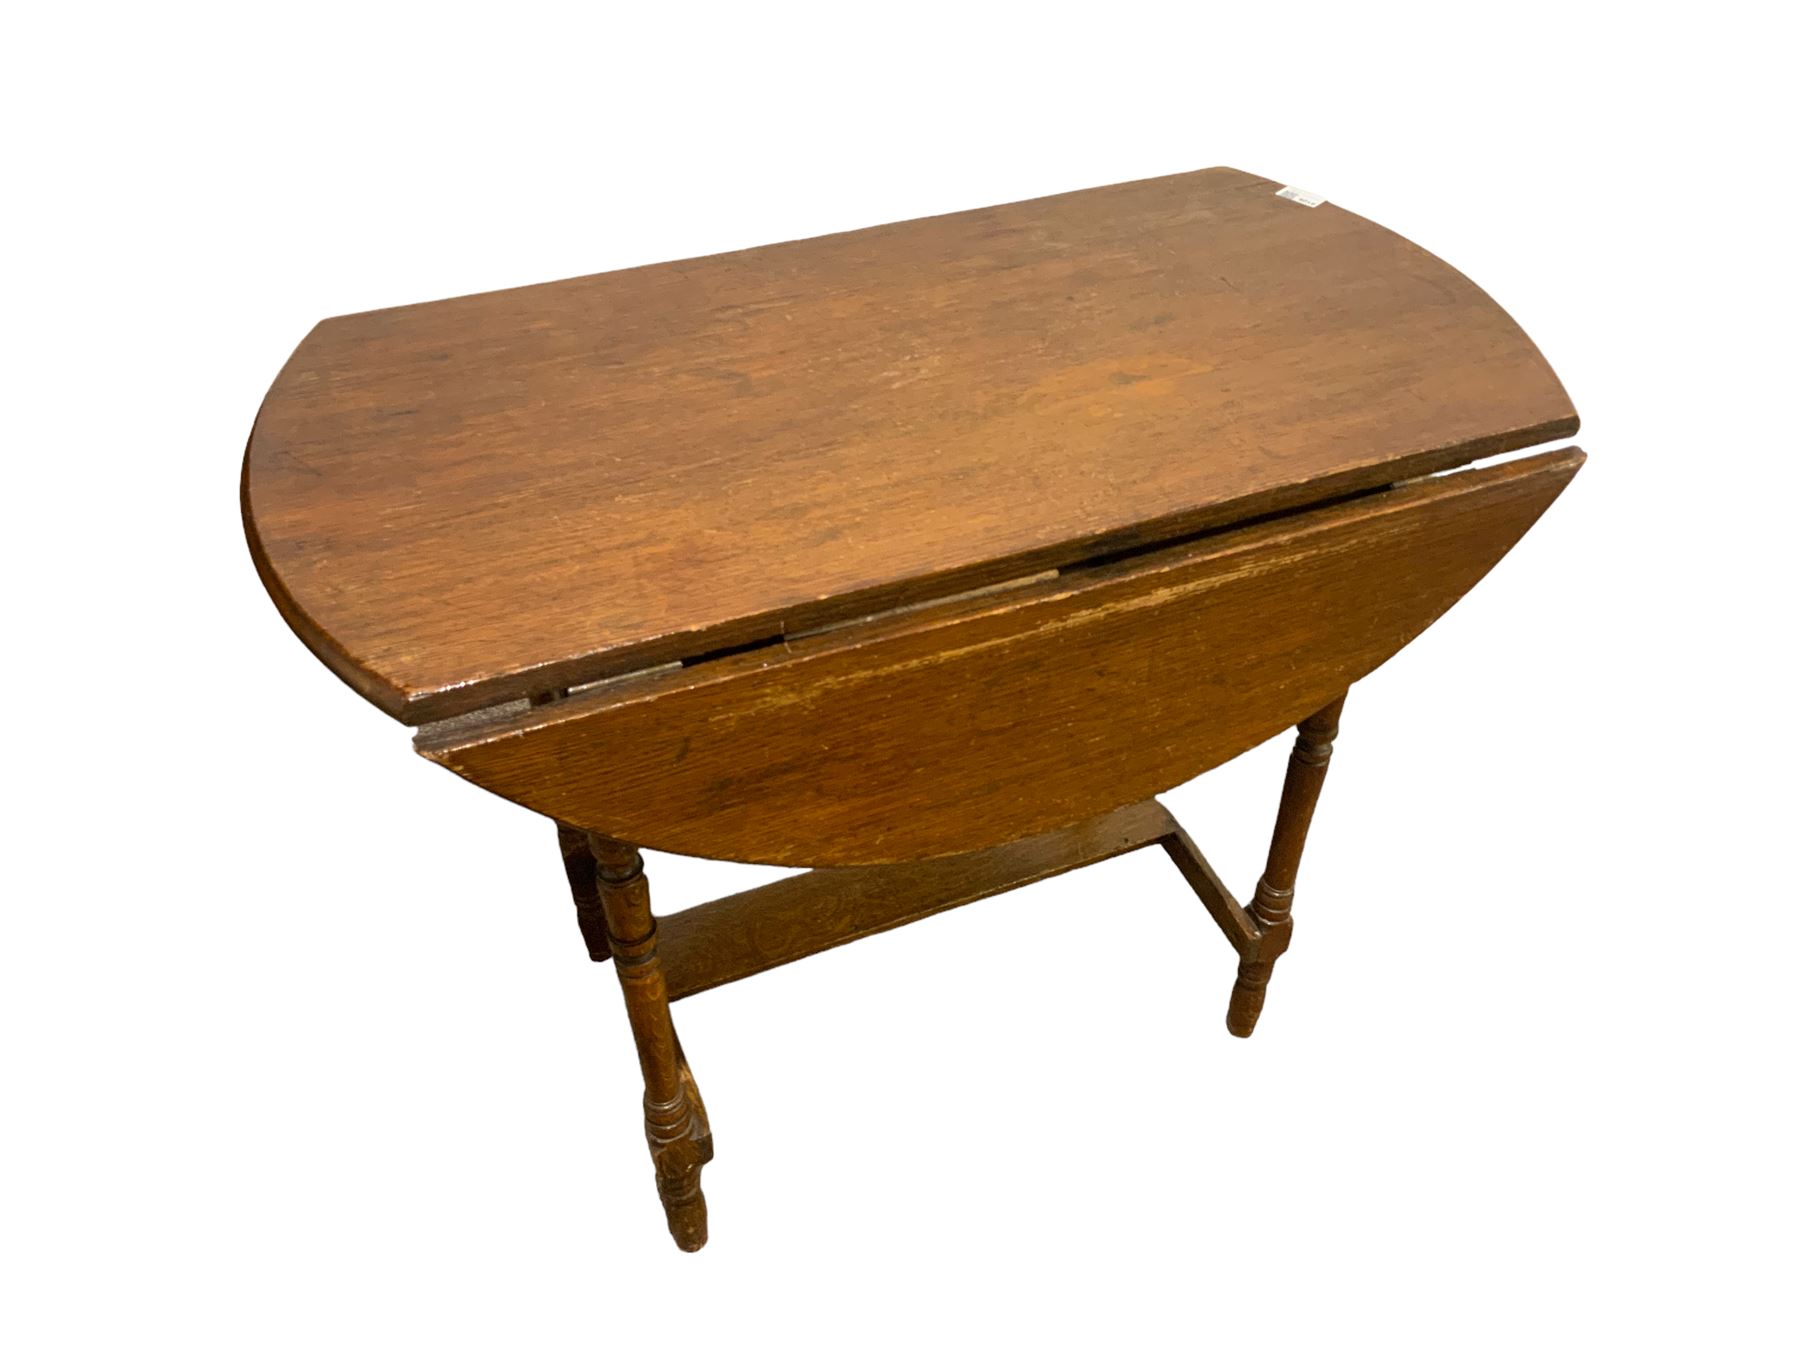 Oak oval drop leaf occasional table - Image 2 of 2